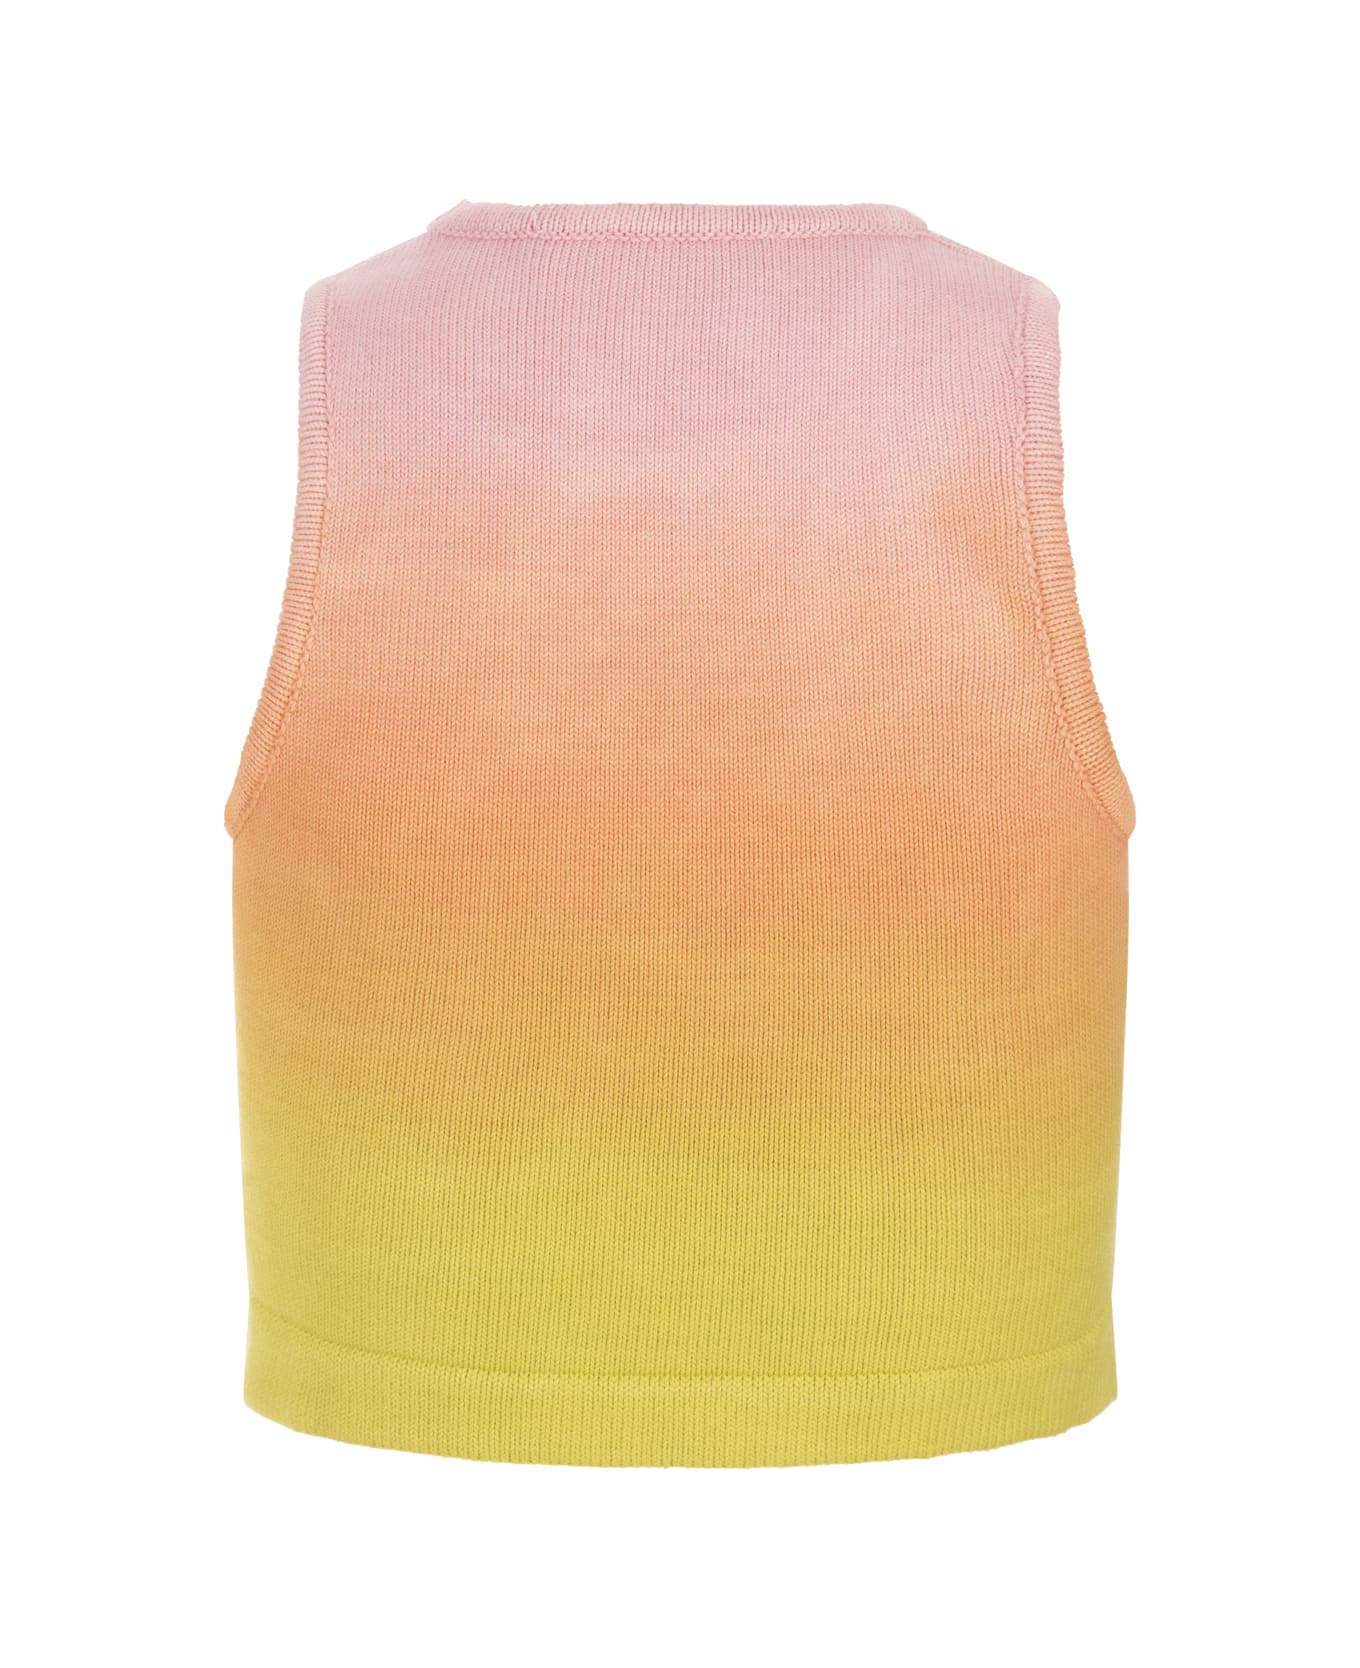 Barrow Multicoloured Knitted Crop Top With Degradé Effect - Multicolor